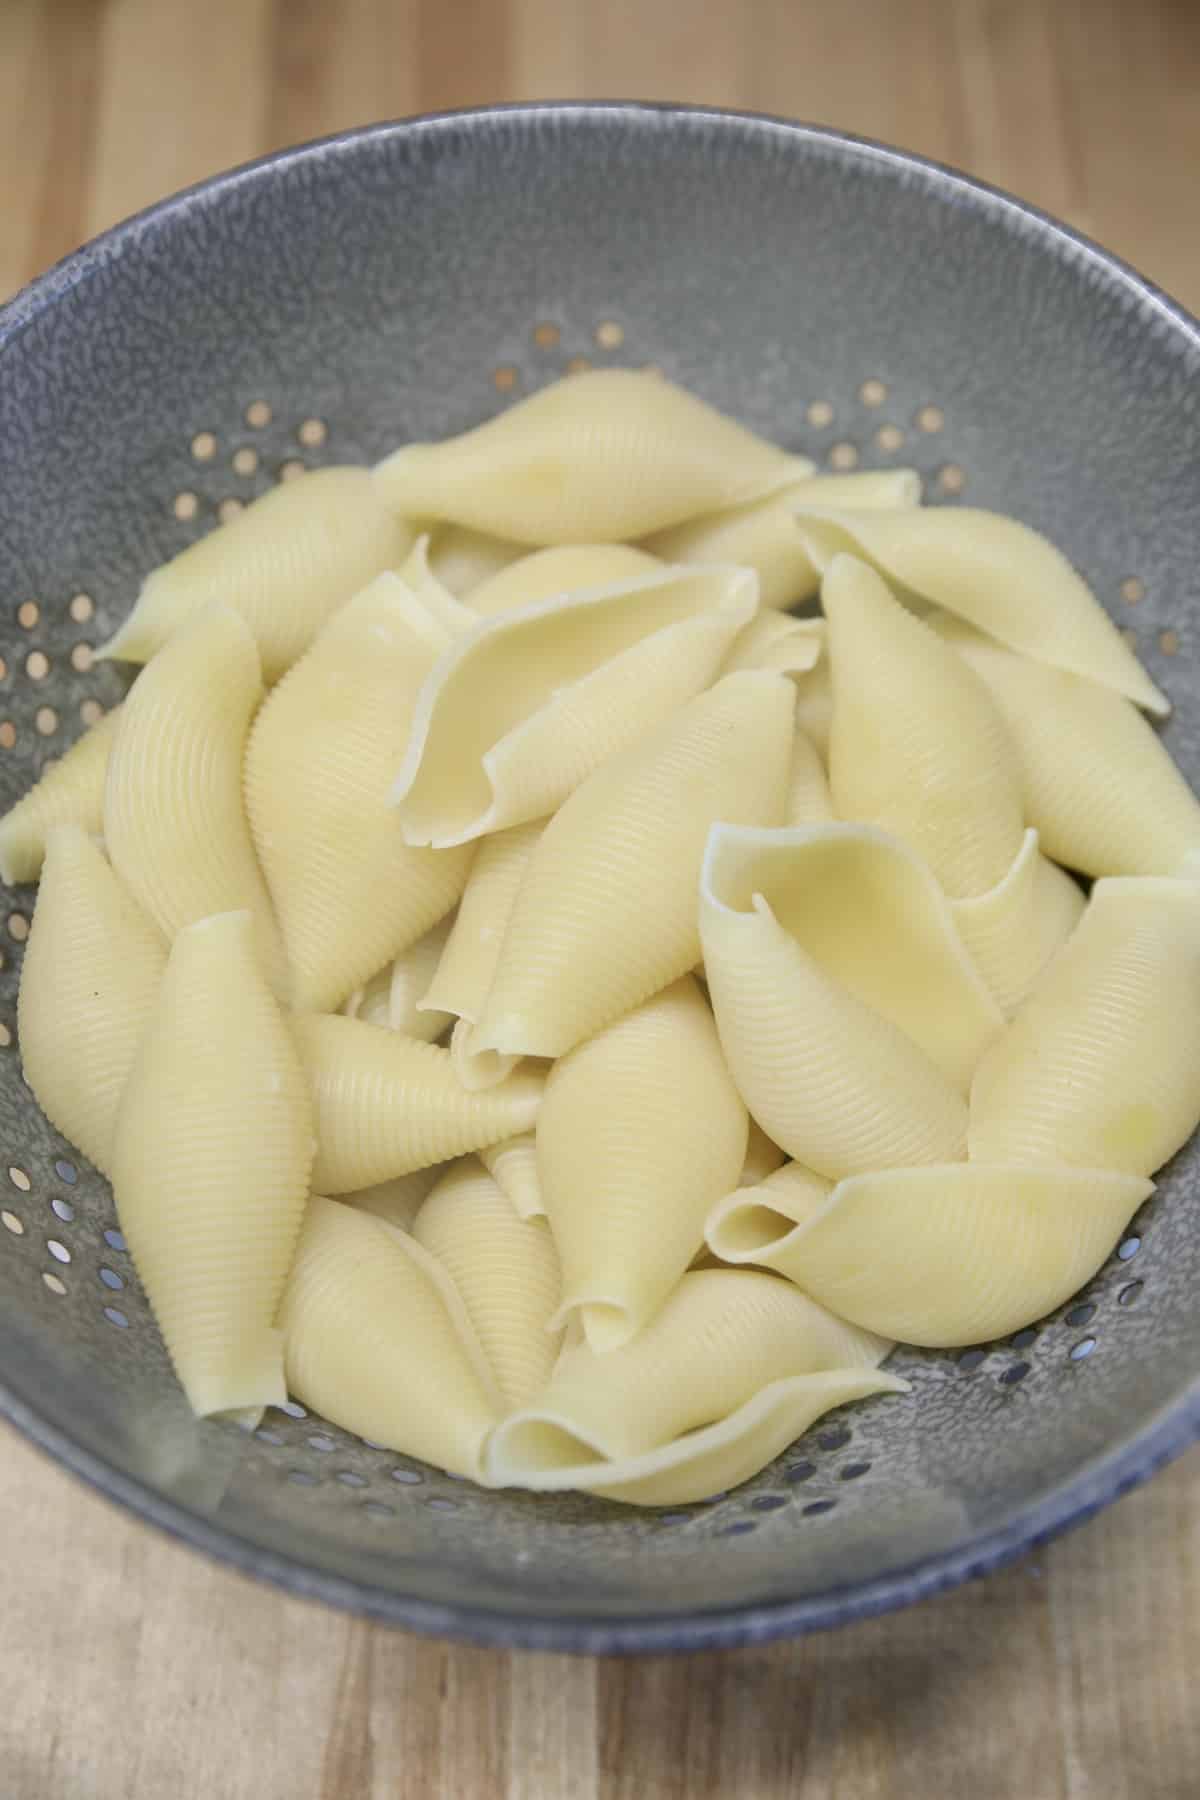 Cooked and drained jumbo pasta shells in a colander.